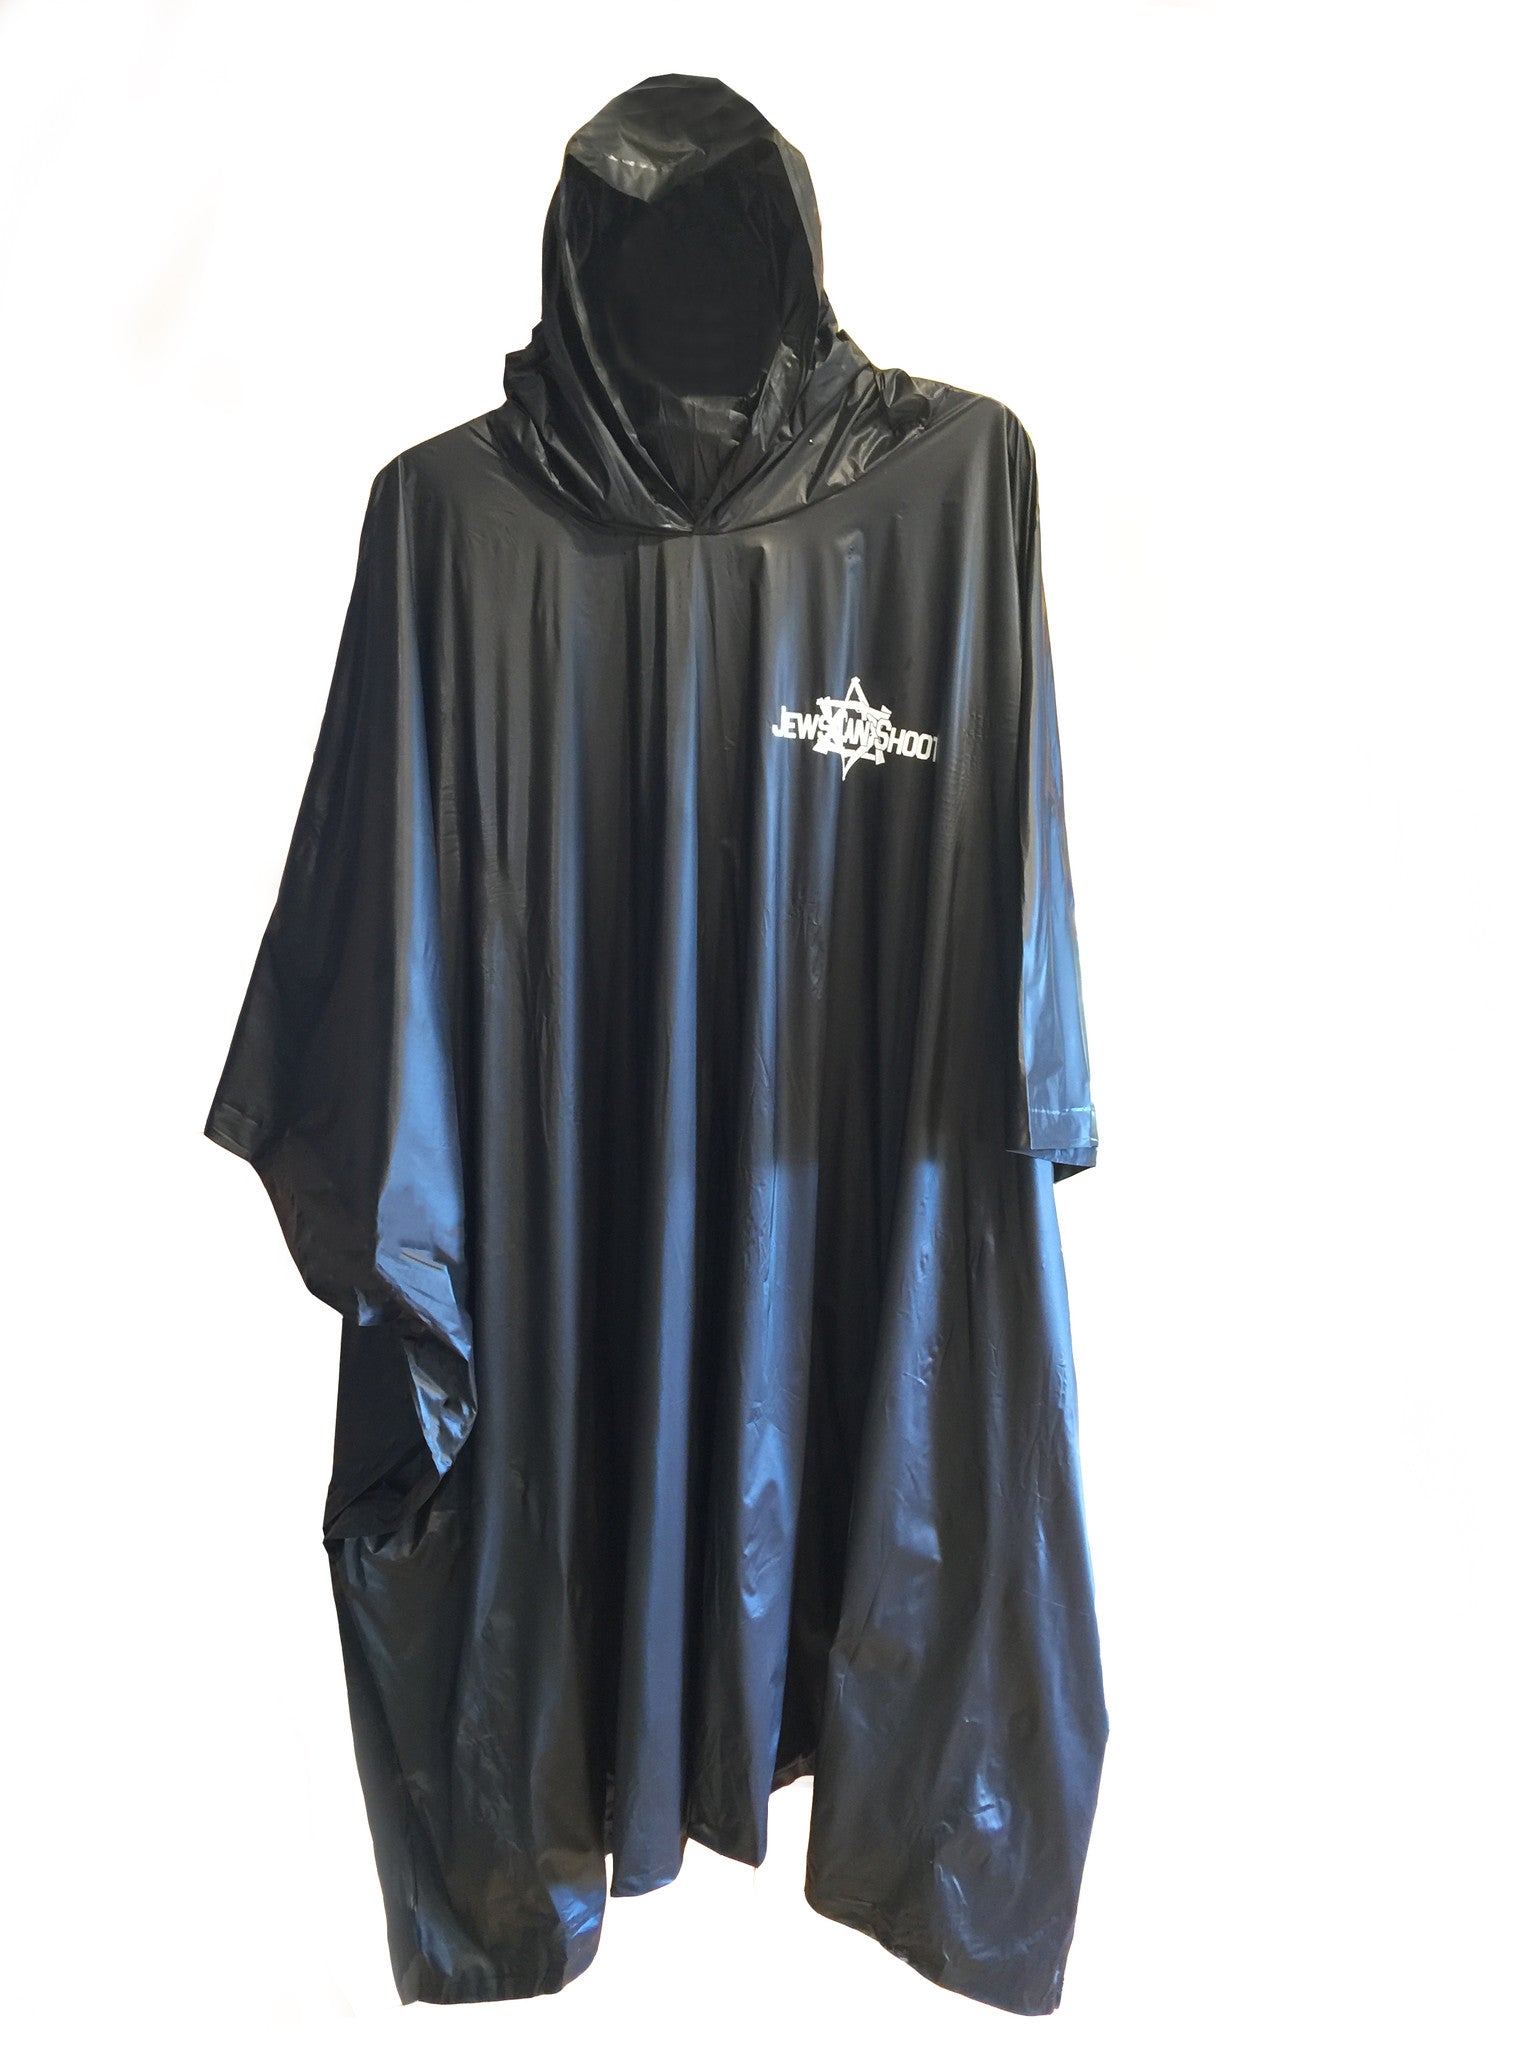 Save your day at the range if it starts to rain with this waterproof rain poncho. Proudly displays Jews Can Shoot logo. Also great for running out to get your mail or take out the trash. Easy on - easy off.  The vinyl rain protector can be packed in the included clear pouch for portability. The convenient poncho comes in a one-size-fits-most-adults size and includes a hood and snaps at the sides for extra protection against the elements. Pouch size is 8-1/4" x 9-1/4".